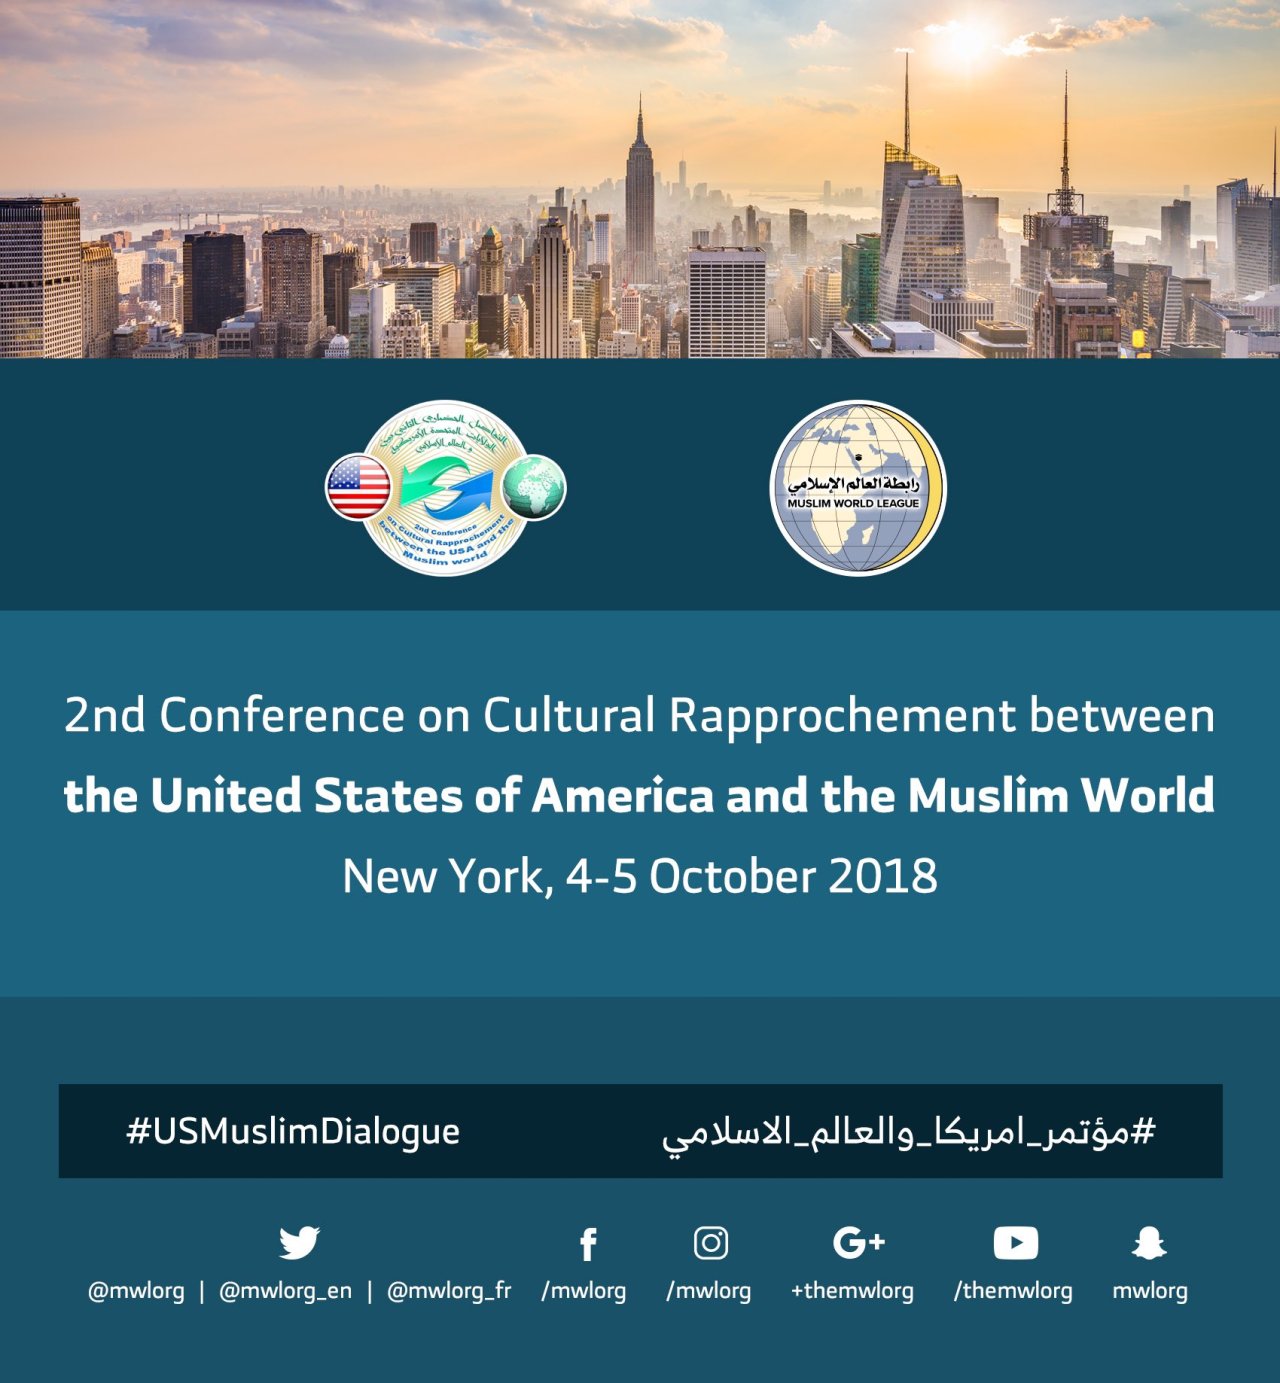 The conference on “Cultural Rapprochement between the Muslim World & the United States of America” launches